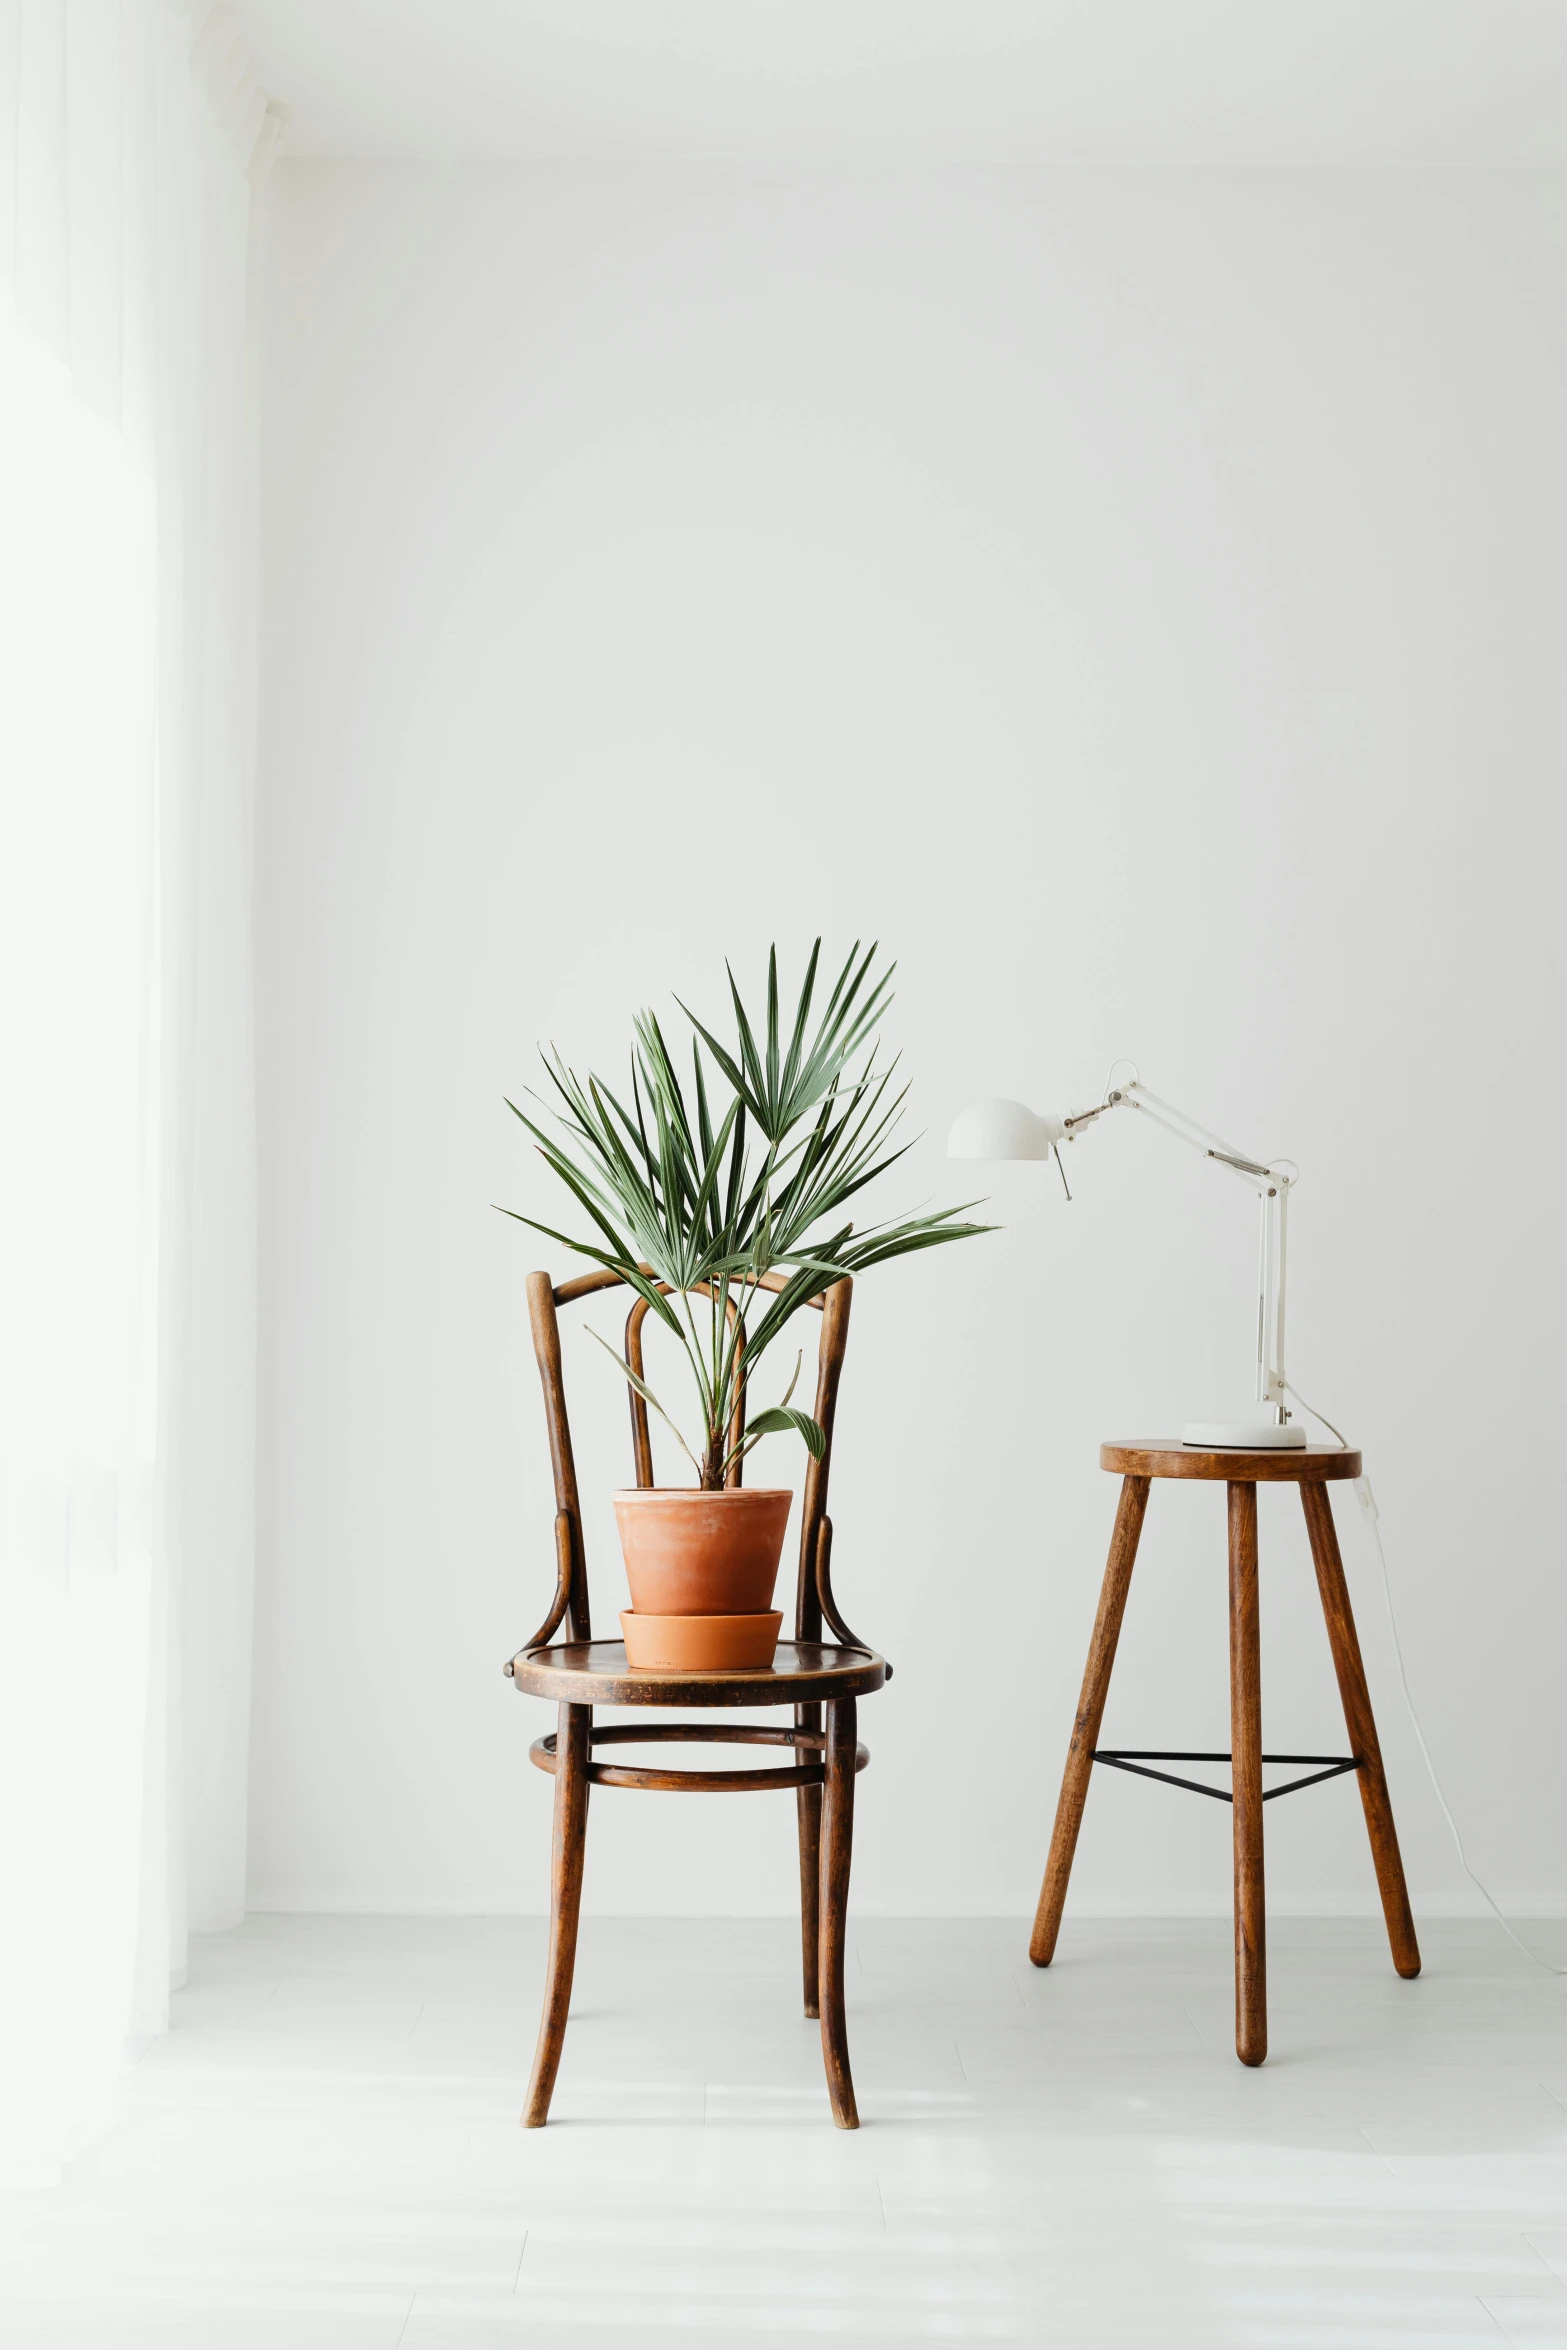 a potted plant sitting on top of a wooden chair, inspired by Constantin Hansen, minimalism, brightly lit room, white backdrop, curated collection, multiple stories